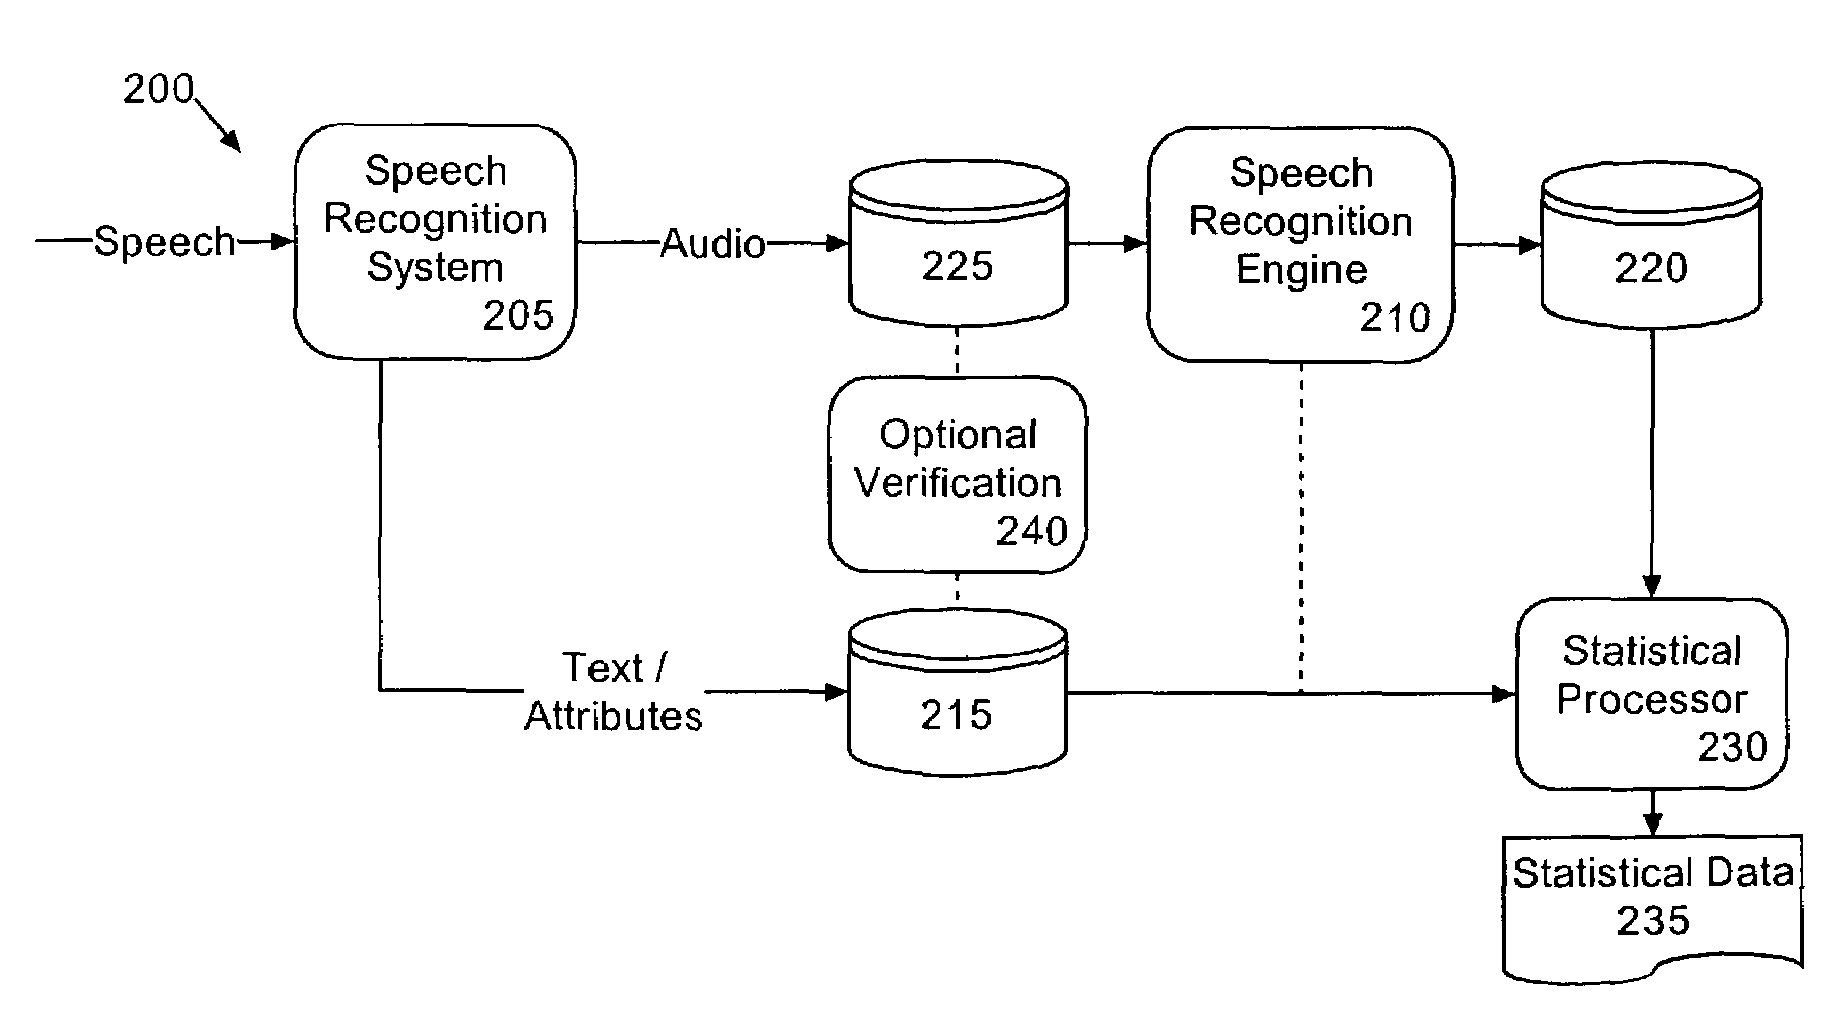 Graphical user interface for determining speech recognition accuracy